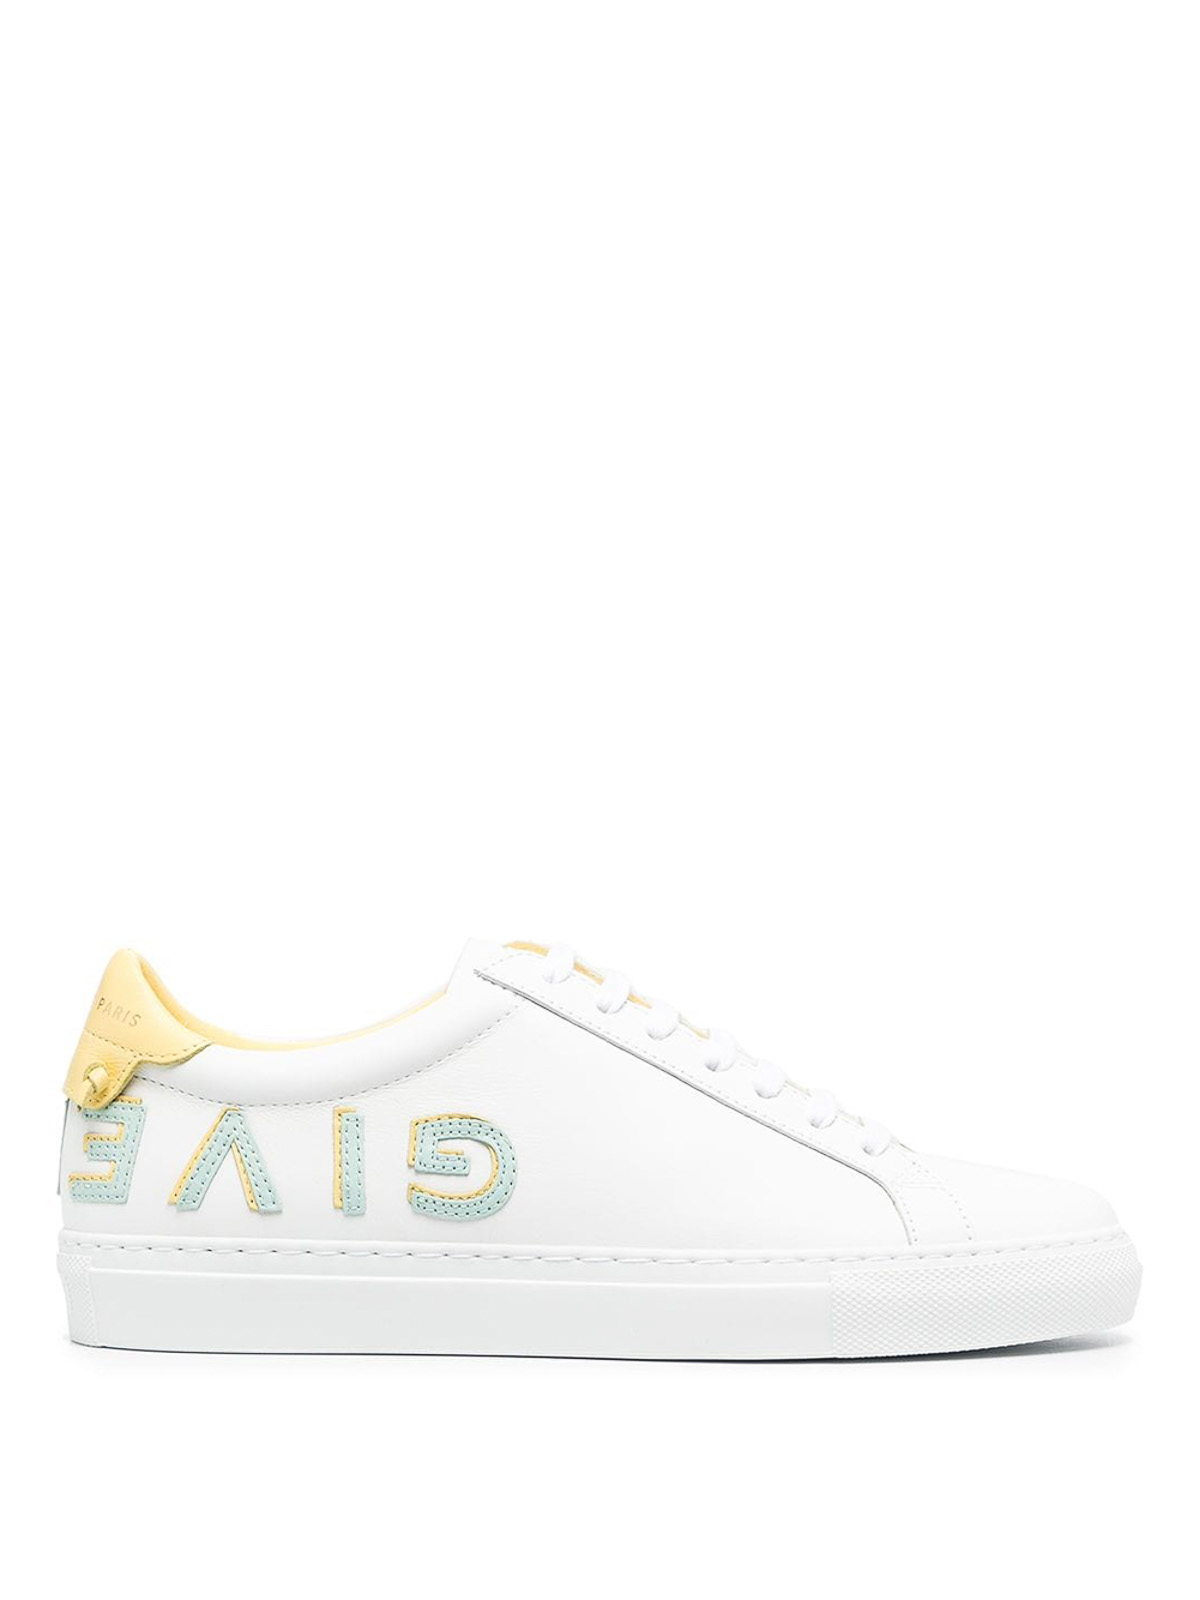 Givenchy URBAN STREET SNEAKERS